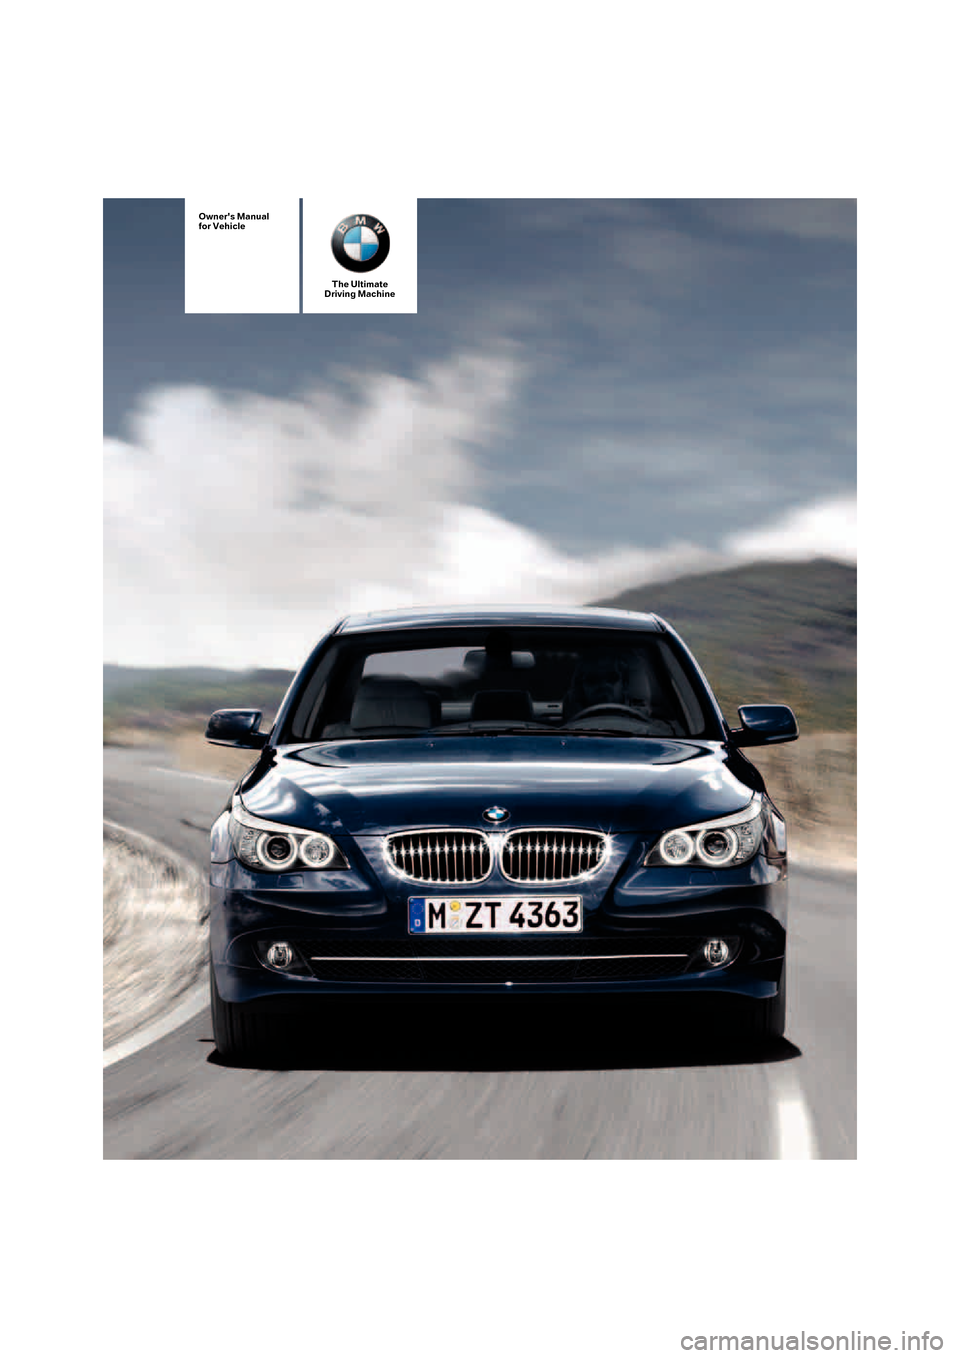 BMW 535I SEDAN 2007 E60 Owners Manual The Ultimate
Driving Machine
Owners Manual
for Vehicle 